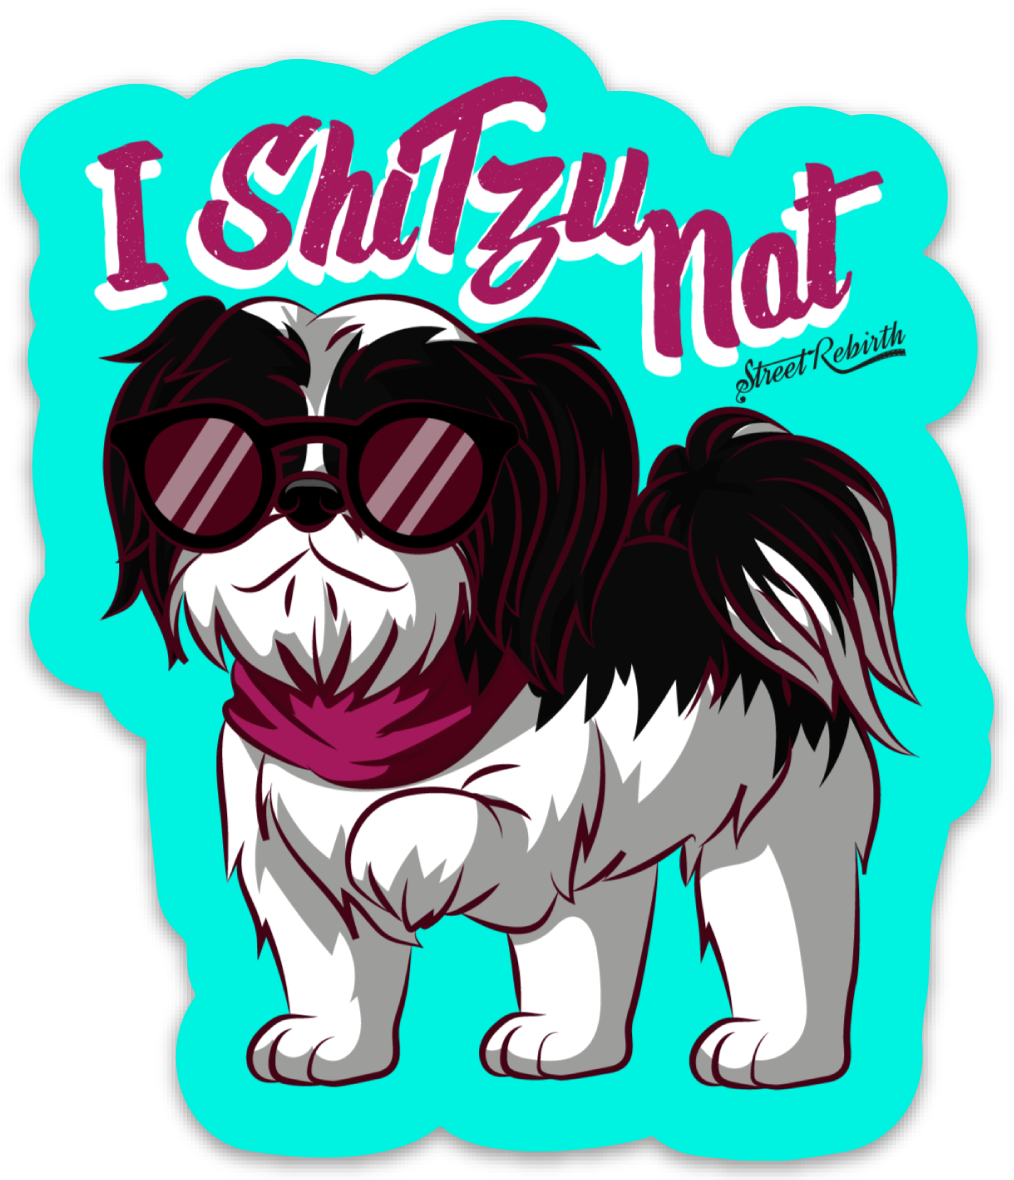 I Shitzu Nat PUN STICKER – ONE 4 INCH WATER PROOF VINYL STICKER – FOR HYDRO FLASK, SKATEBOARD, LAPTOP, PLANNER, CAR, COLLECTING, GIFTING